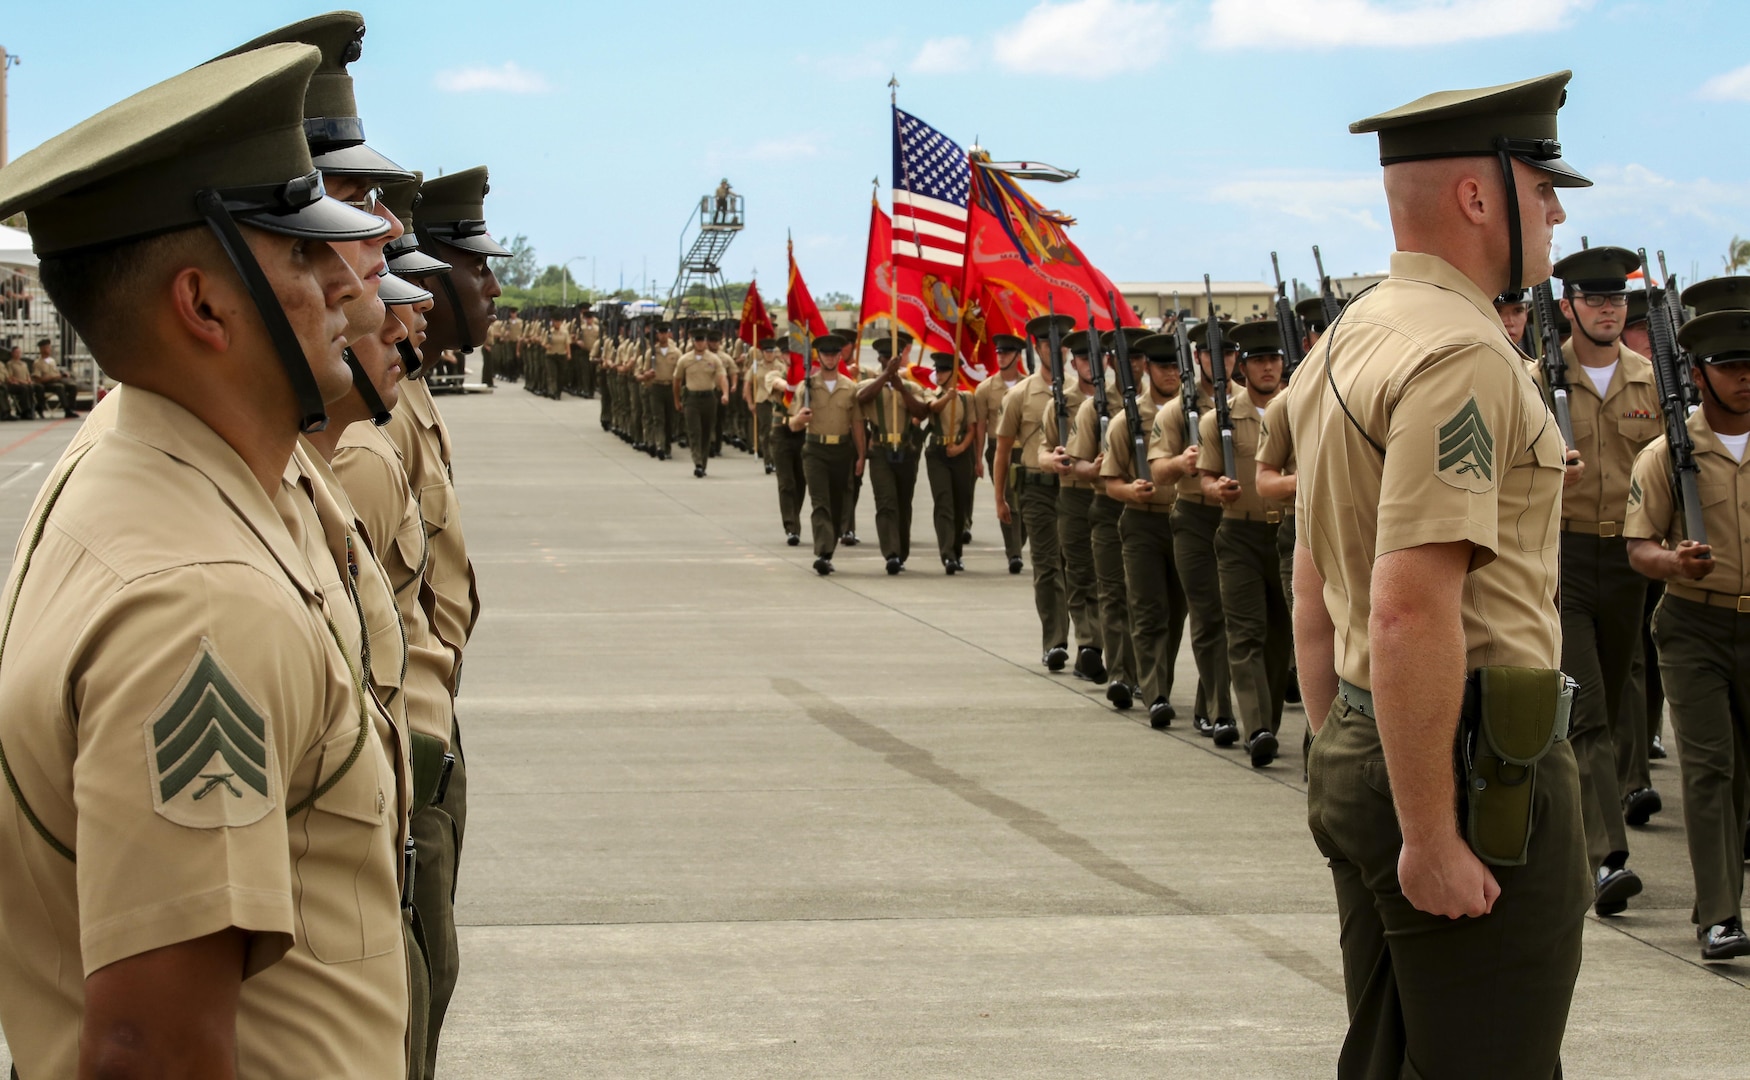 U.S. Marines with U.S. Marine Corps Forces, Pacific conducts a pass in review during the MARFORPAC change of command ceremony at Marine Corps Base Hawaii, Aug. 26, 2016. The change of command ceremony represents the transfer of responsibility and authority over MARFORPAC between commanders.